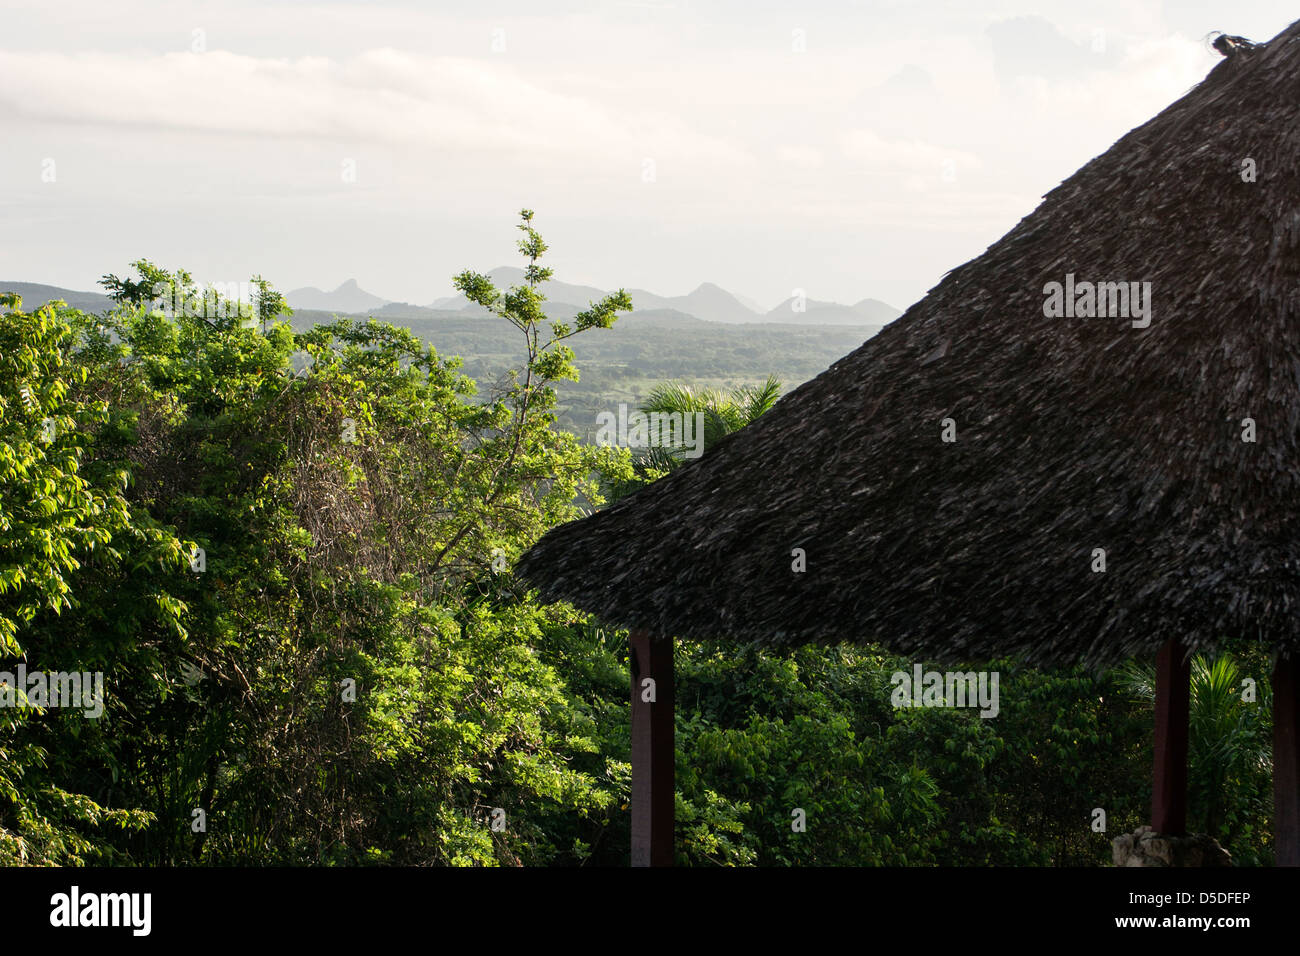 Thatched barn overlooking forest Stock Photo